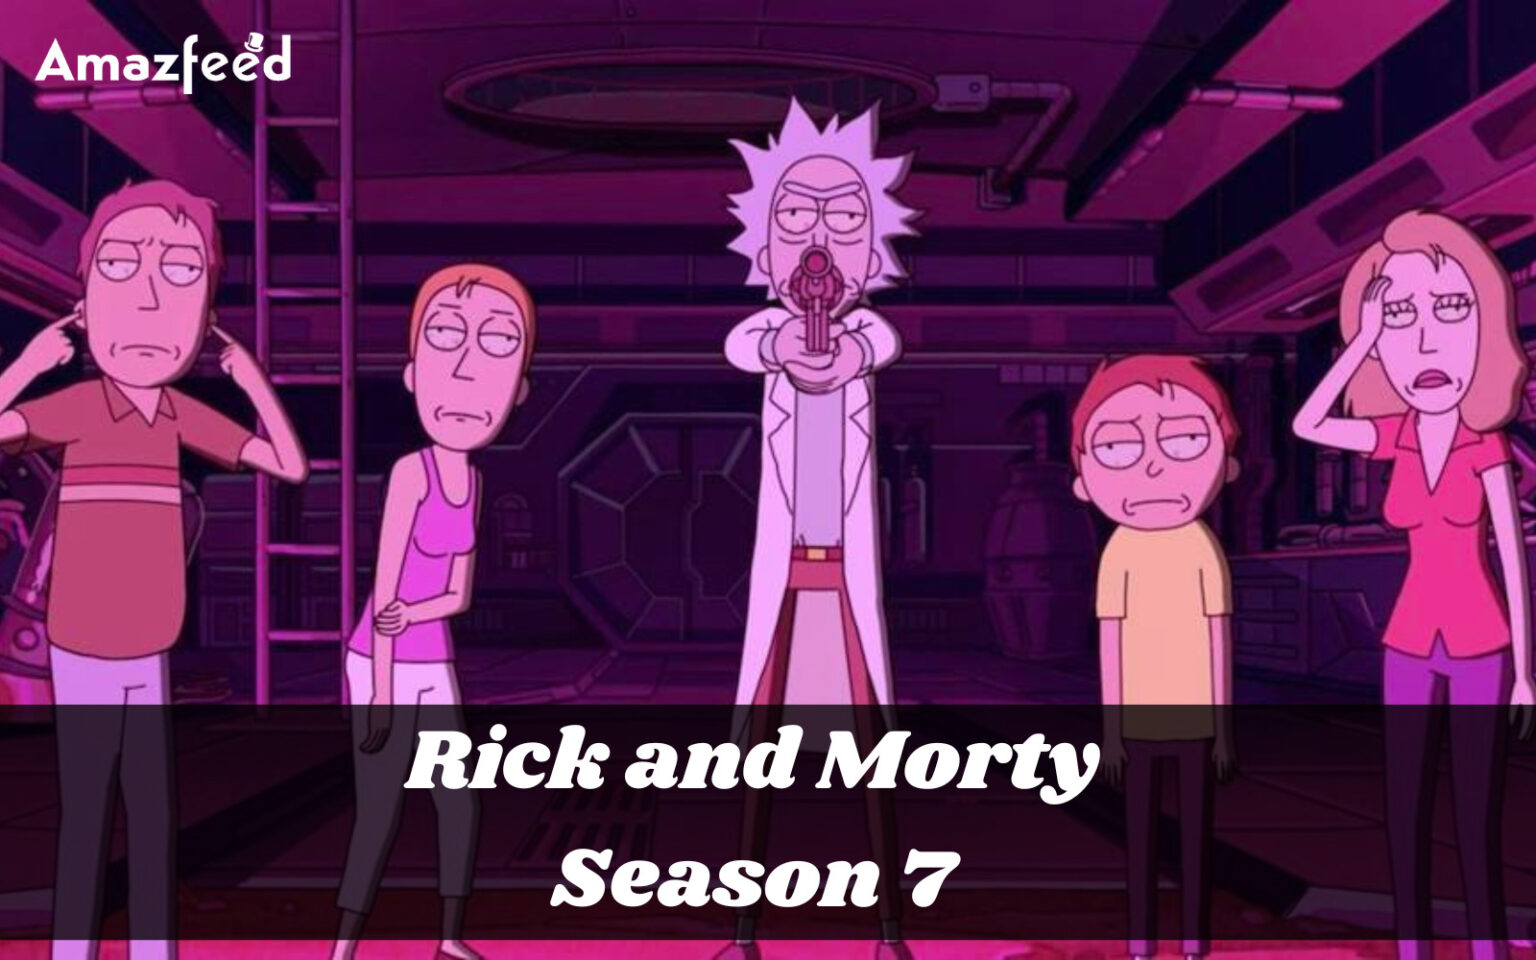 Rick And Morty Season 7 Confirmed Release Date Did The Show Finally Get Renewed Amazfeed 4457